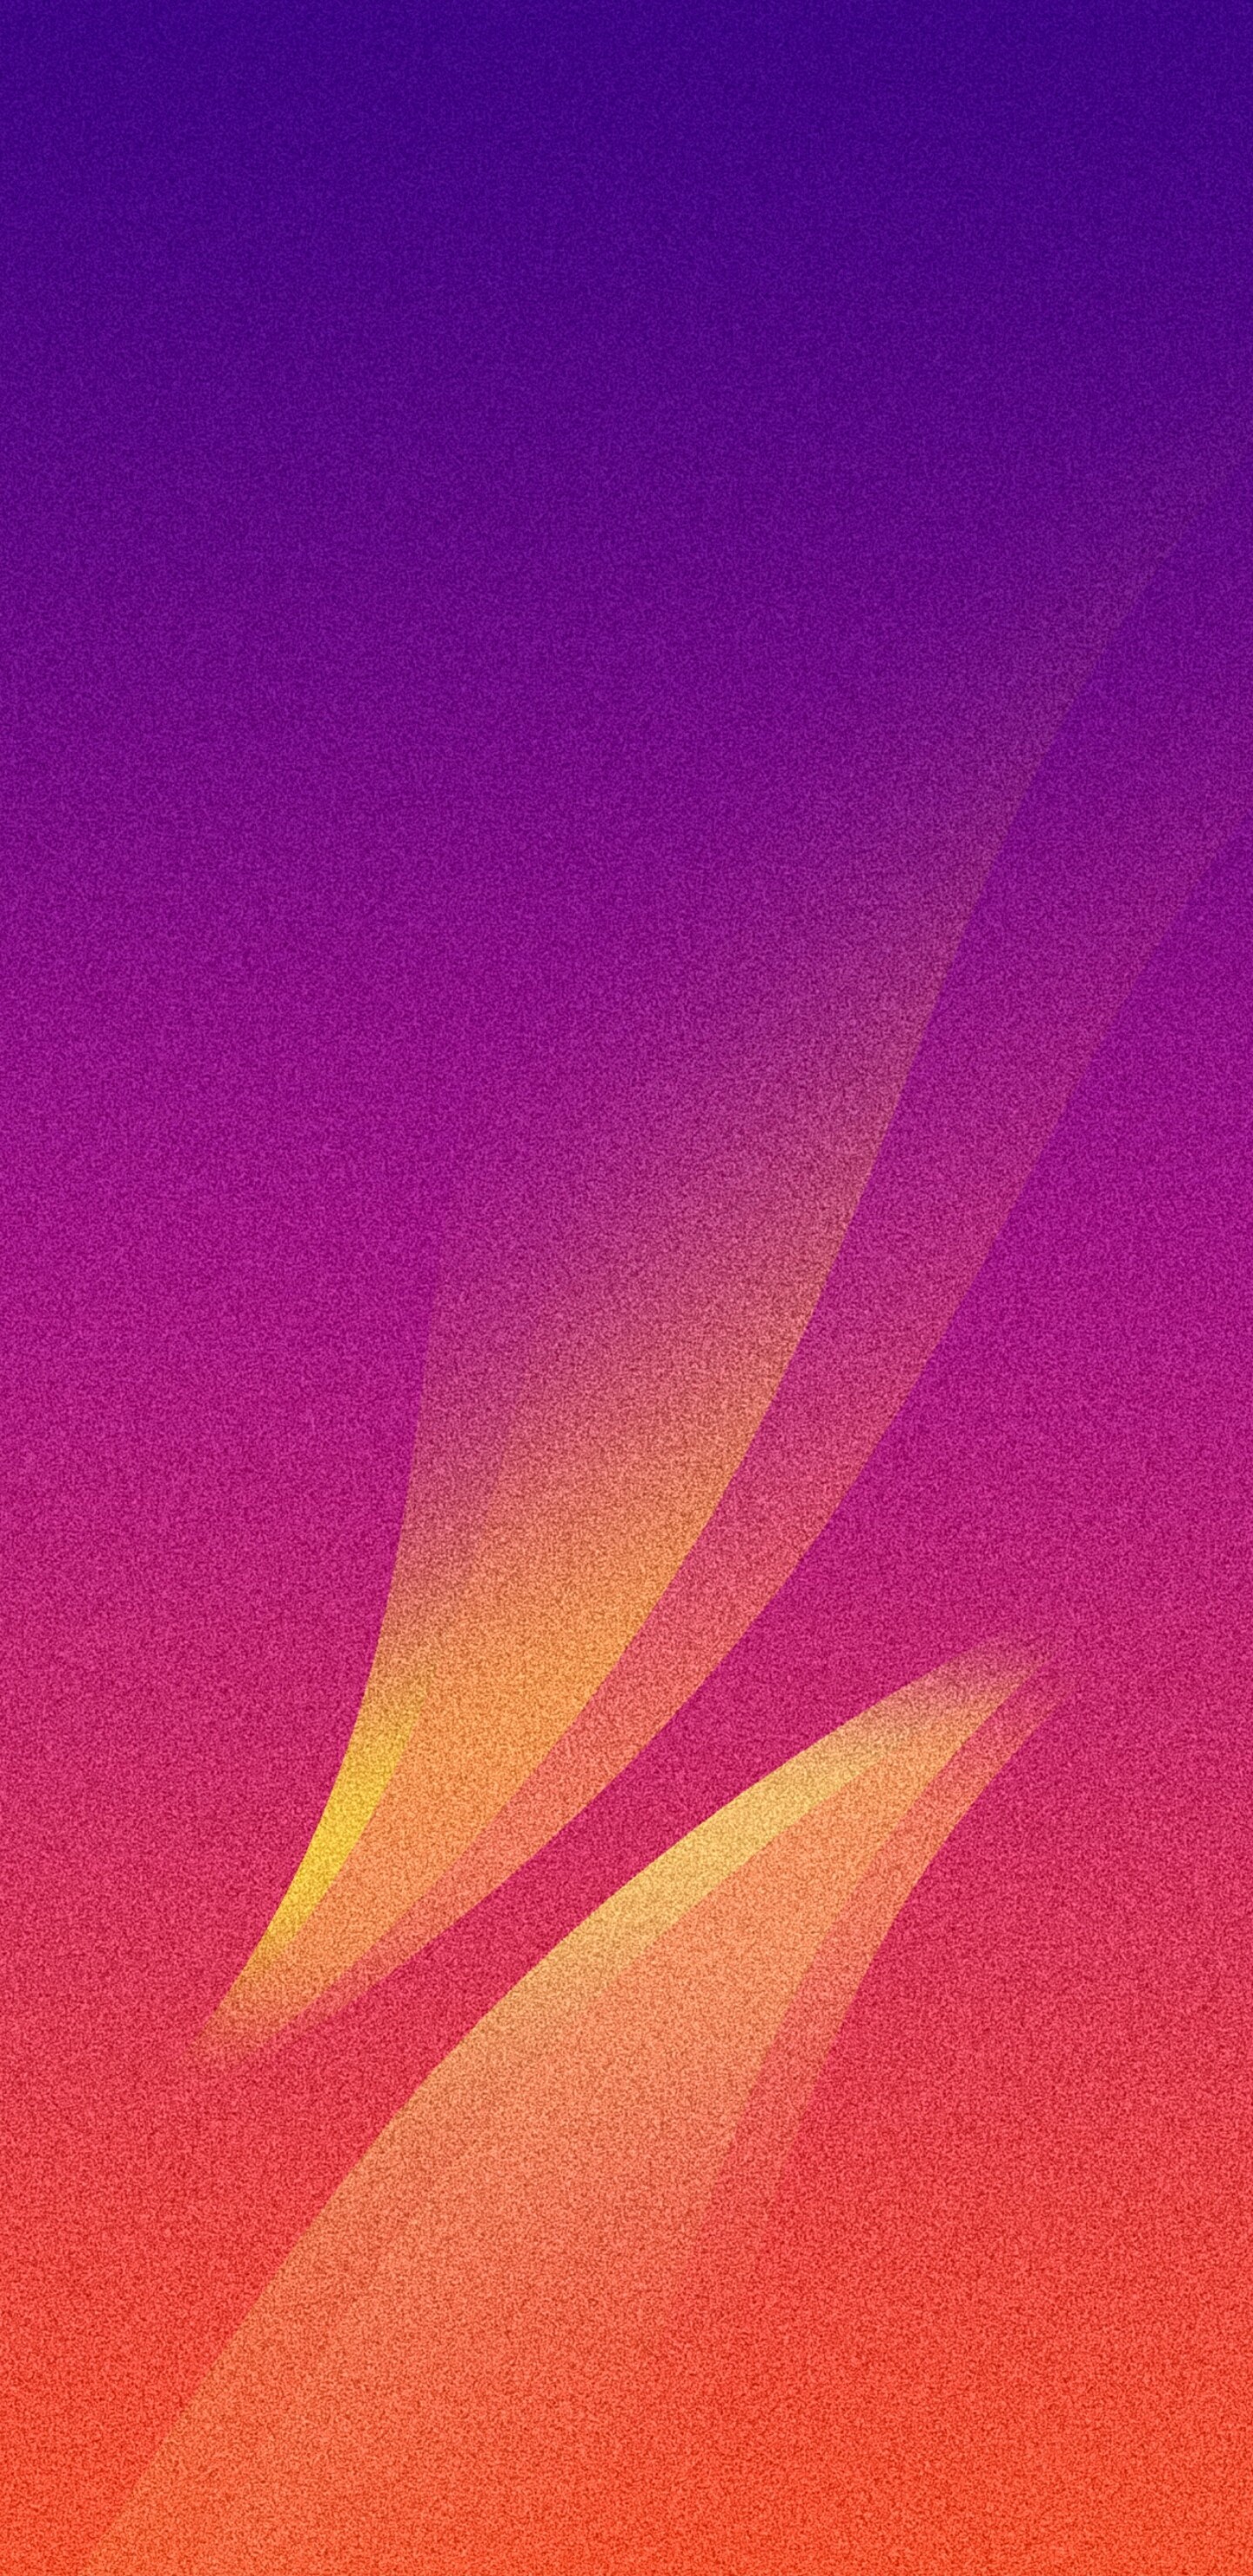 1440x2960 Samsung Galaxy Note 8 Wallpapers